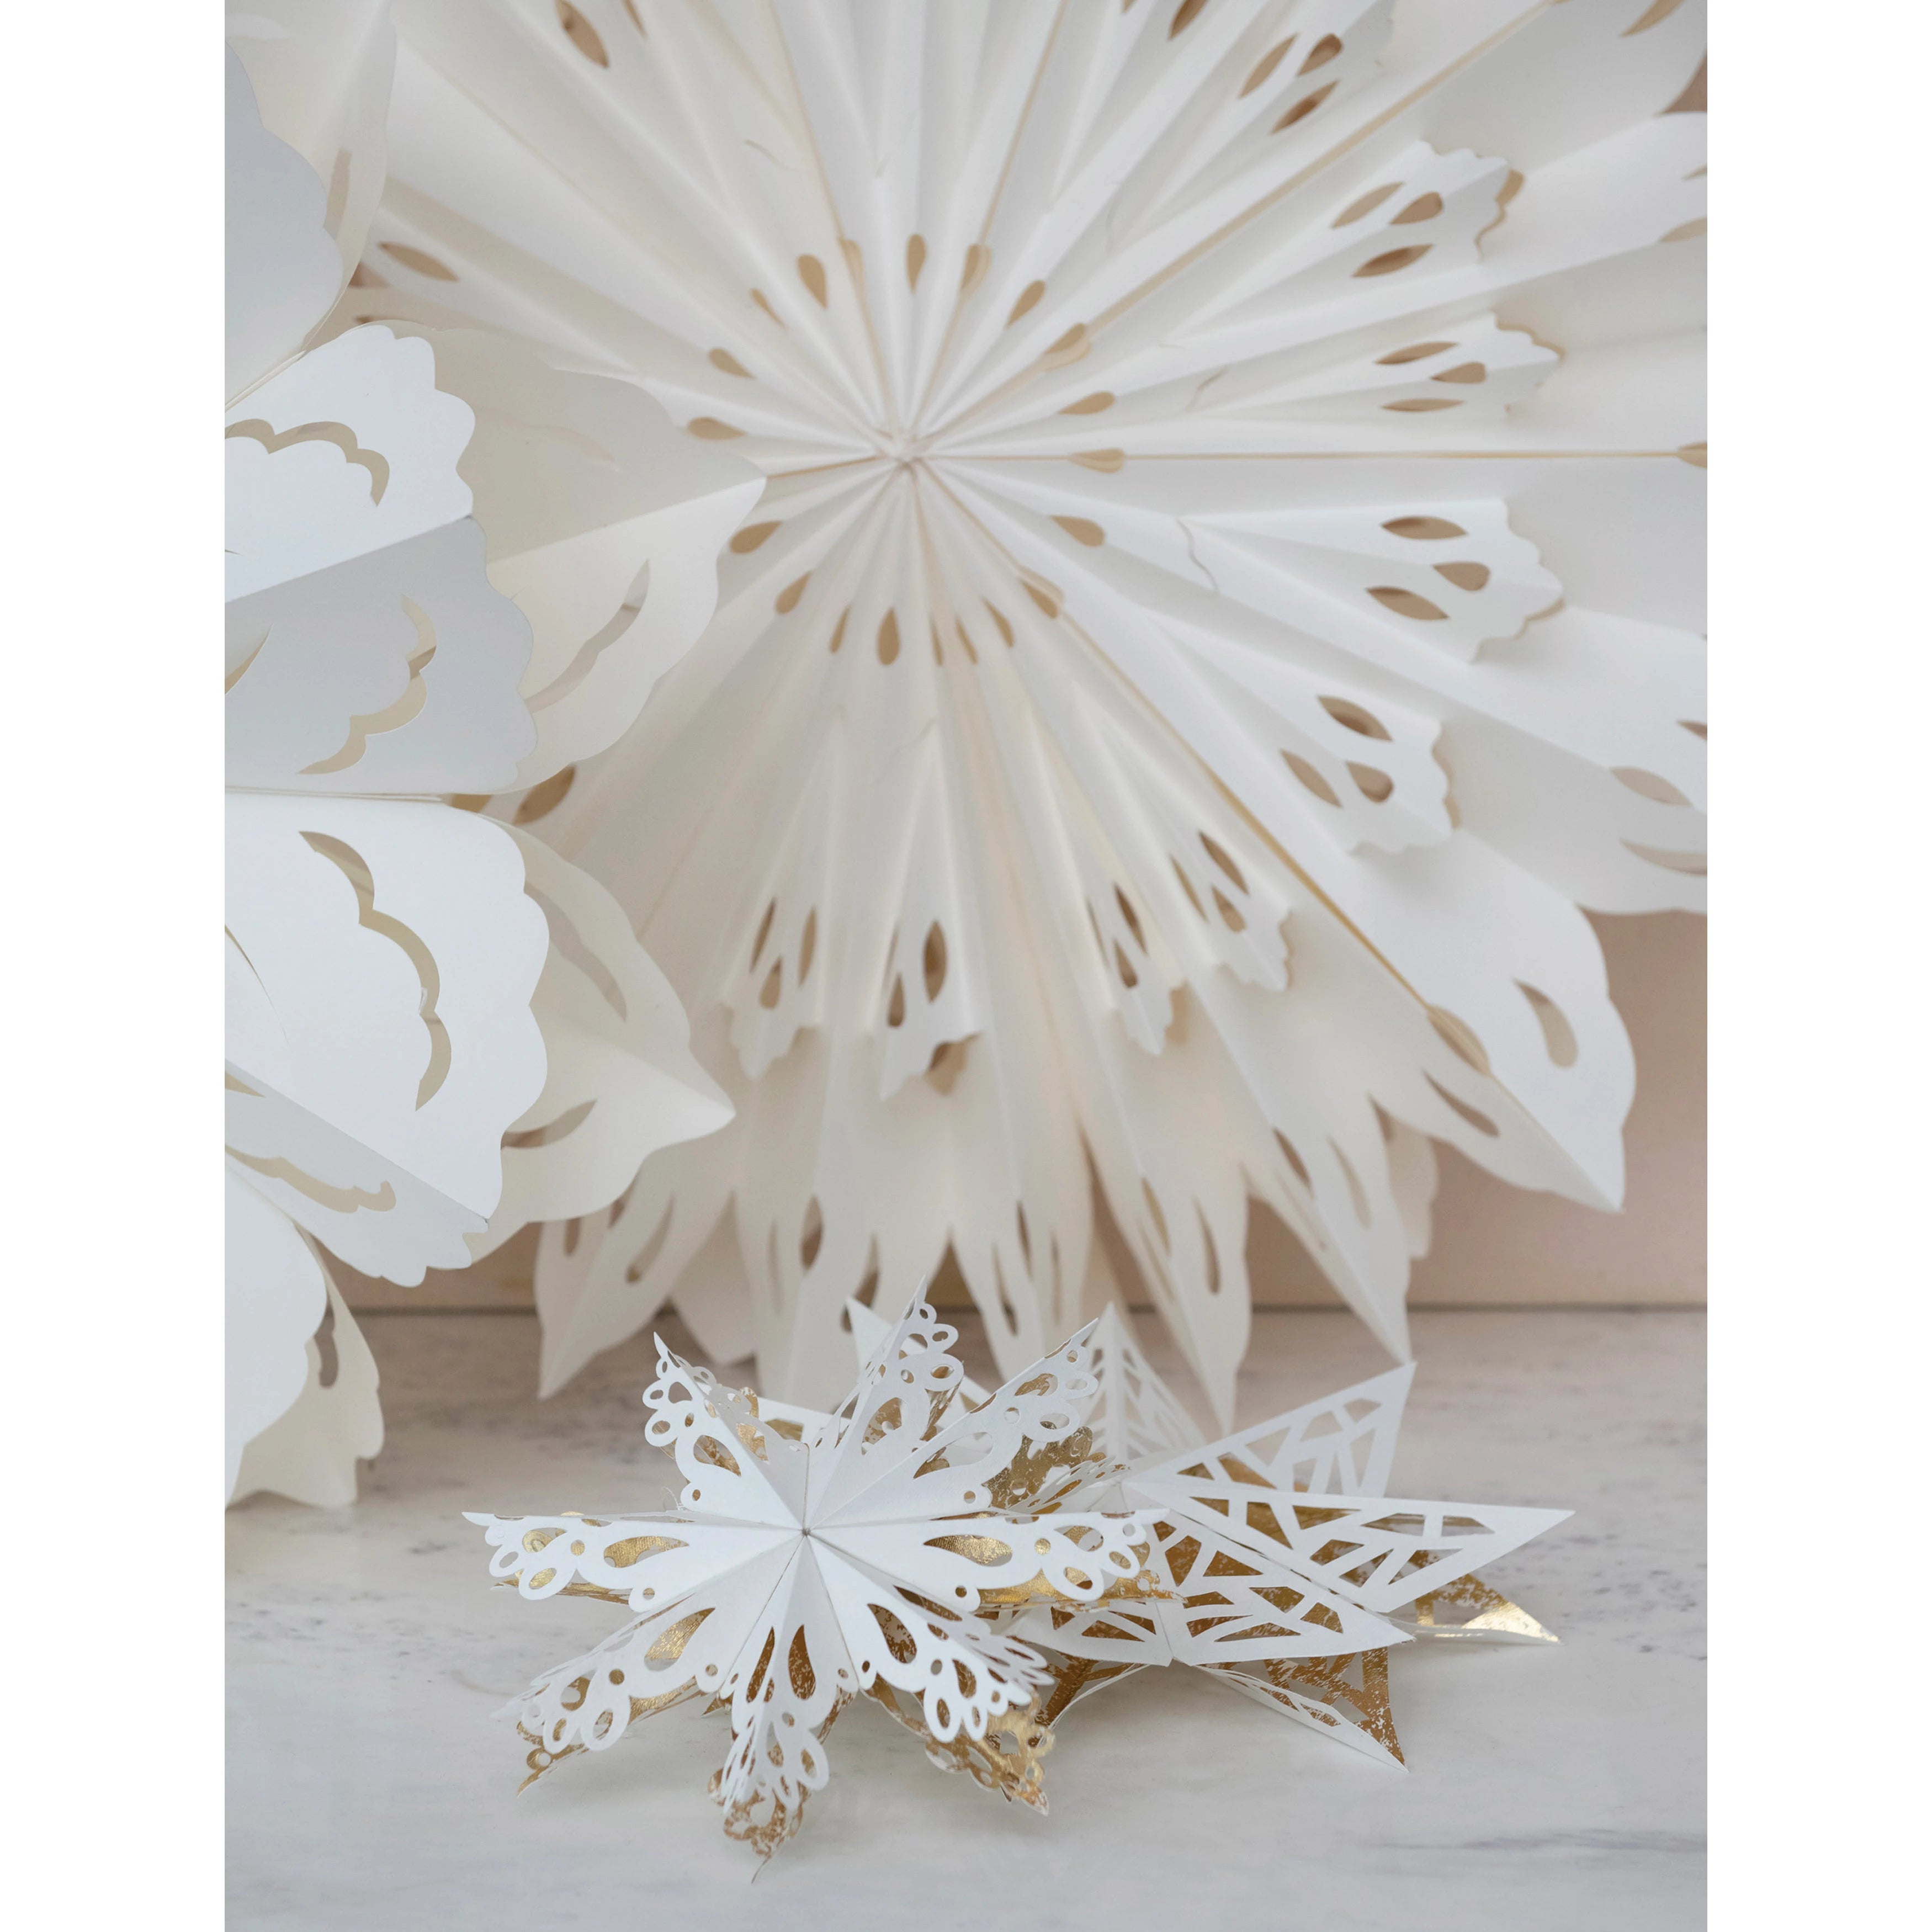 Handmade Recycled Paper Folding Snowflake Ornament, 12&quot;